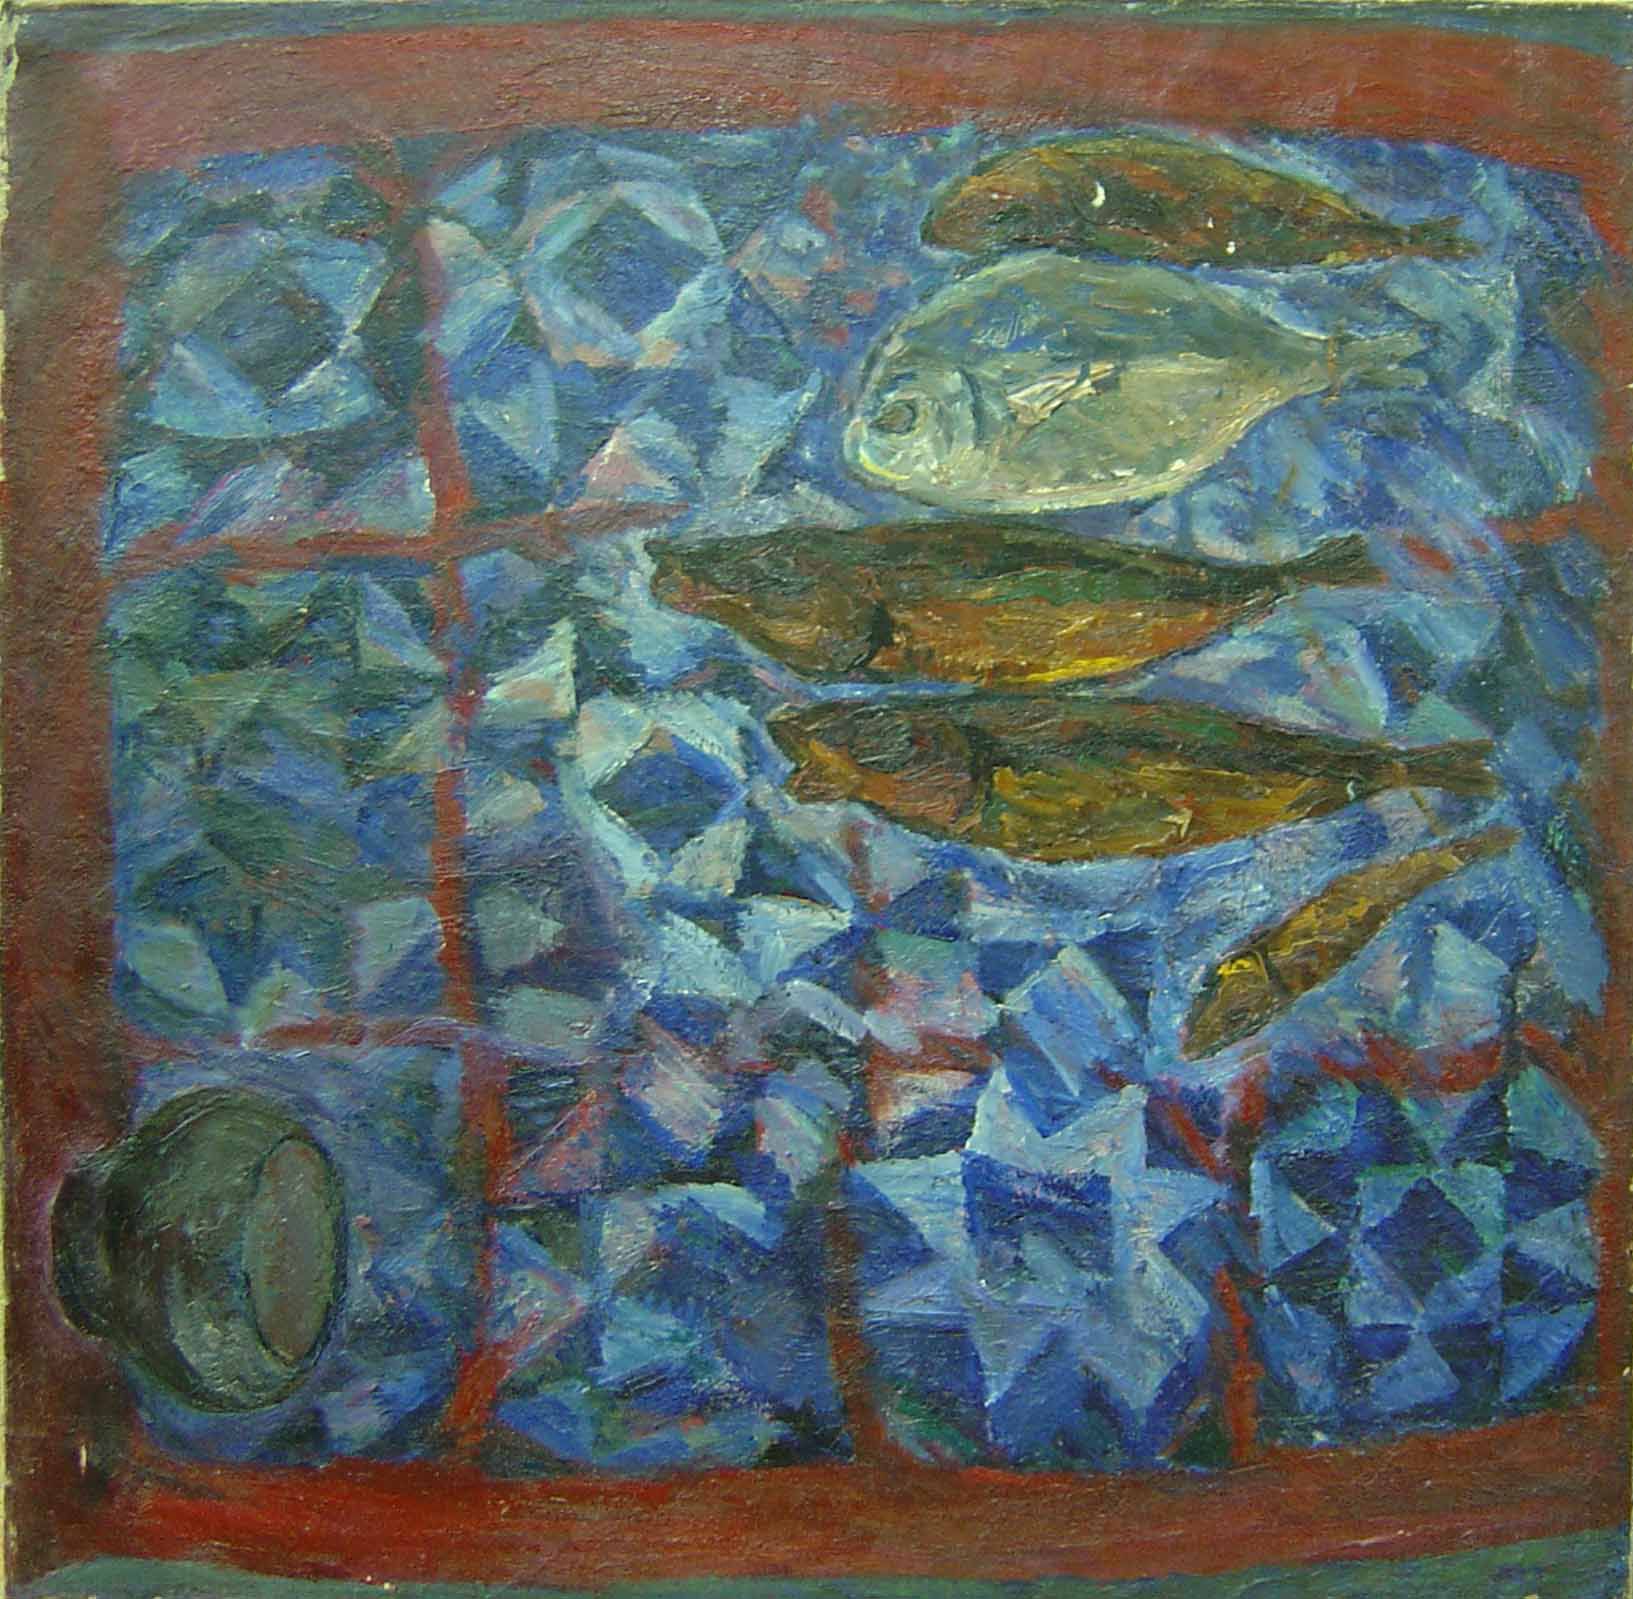 Still life with fish on a blue blanket.